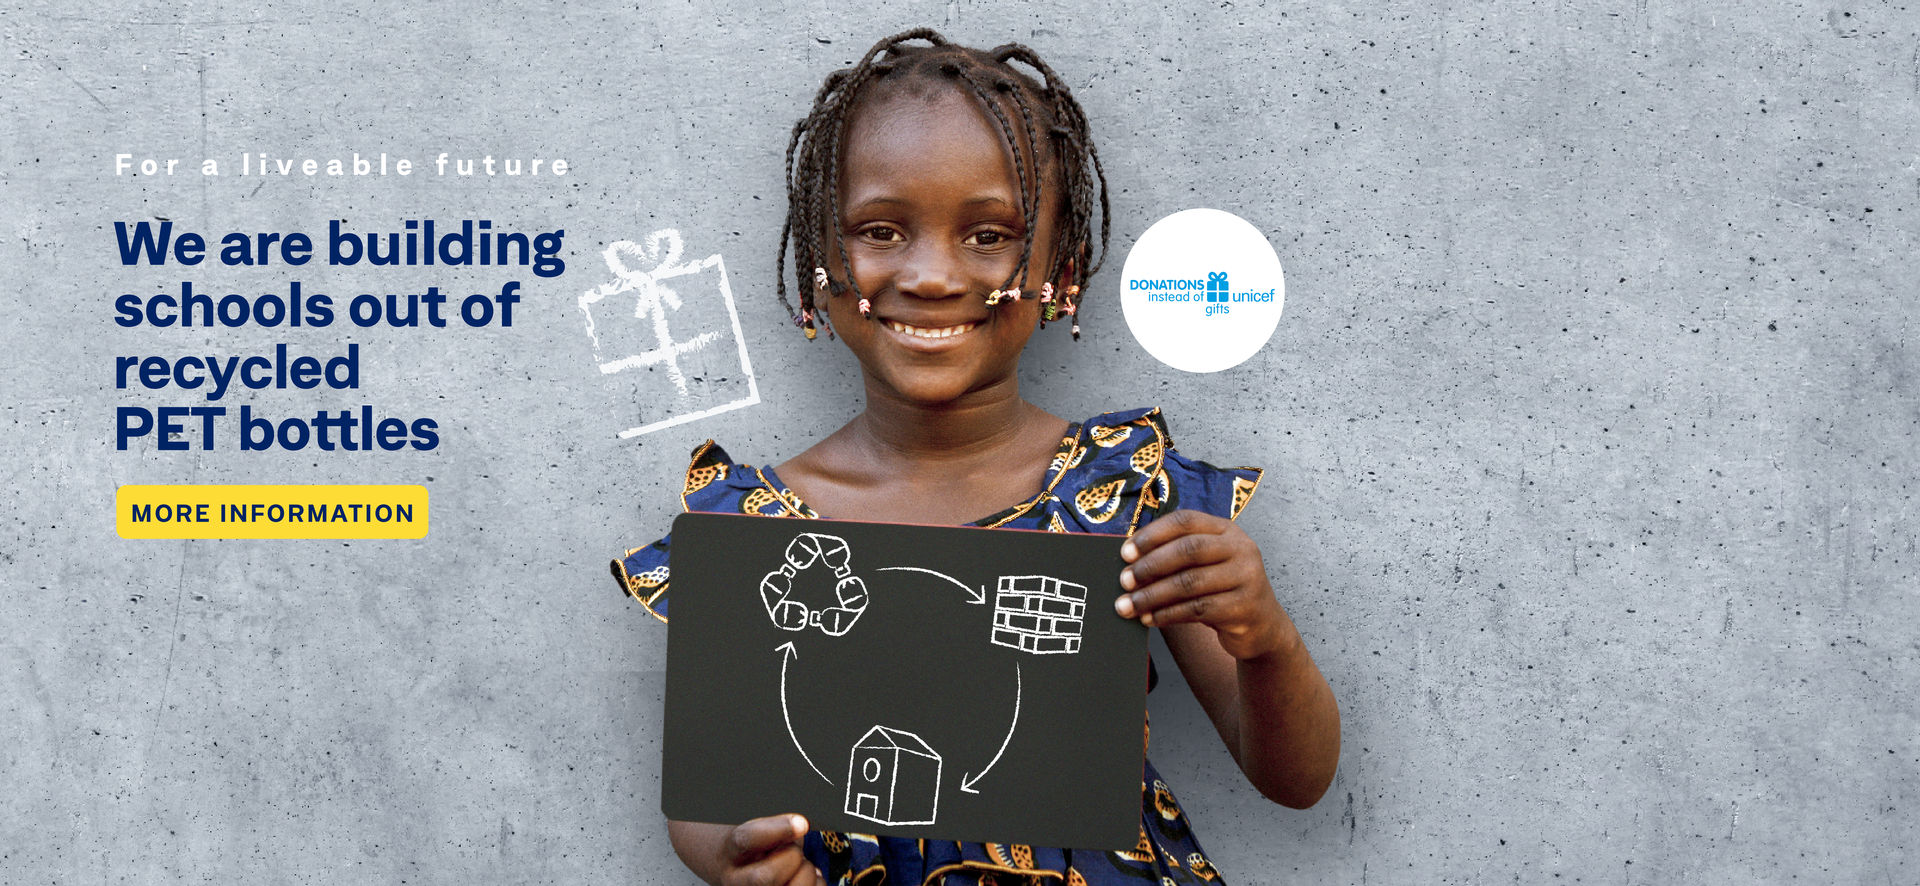 Our sustainable Christmas campaign: Future prospects for children in the Ivory Coast